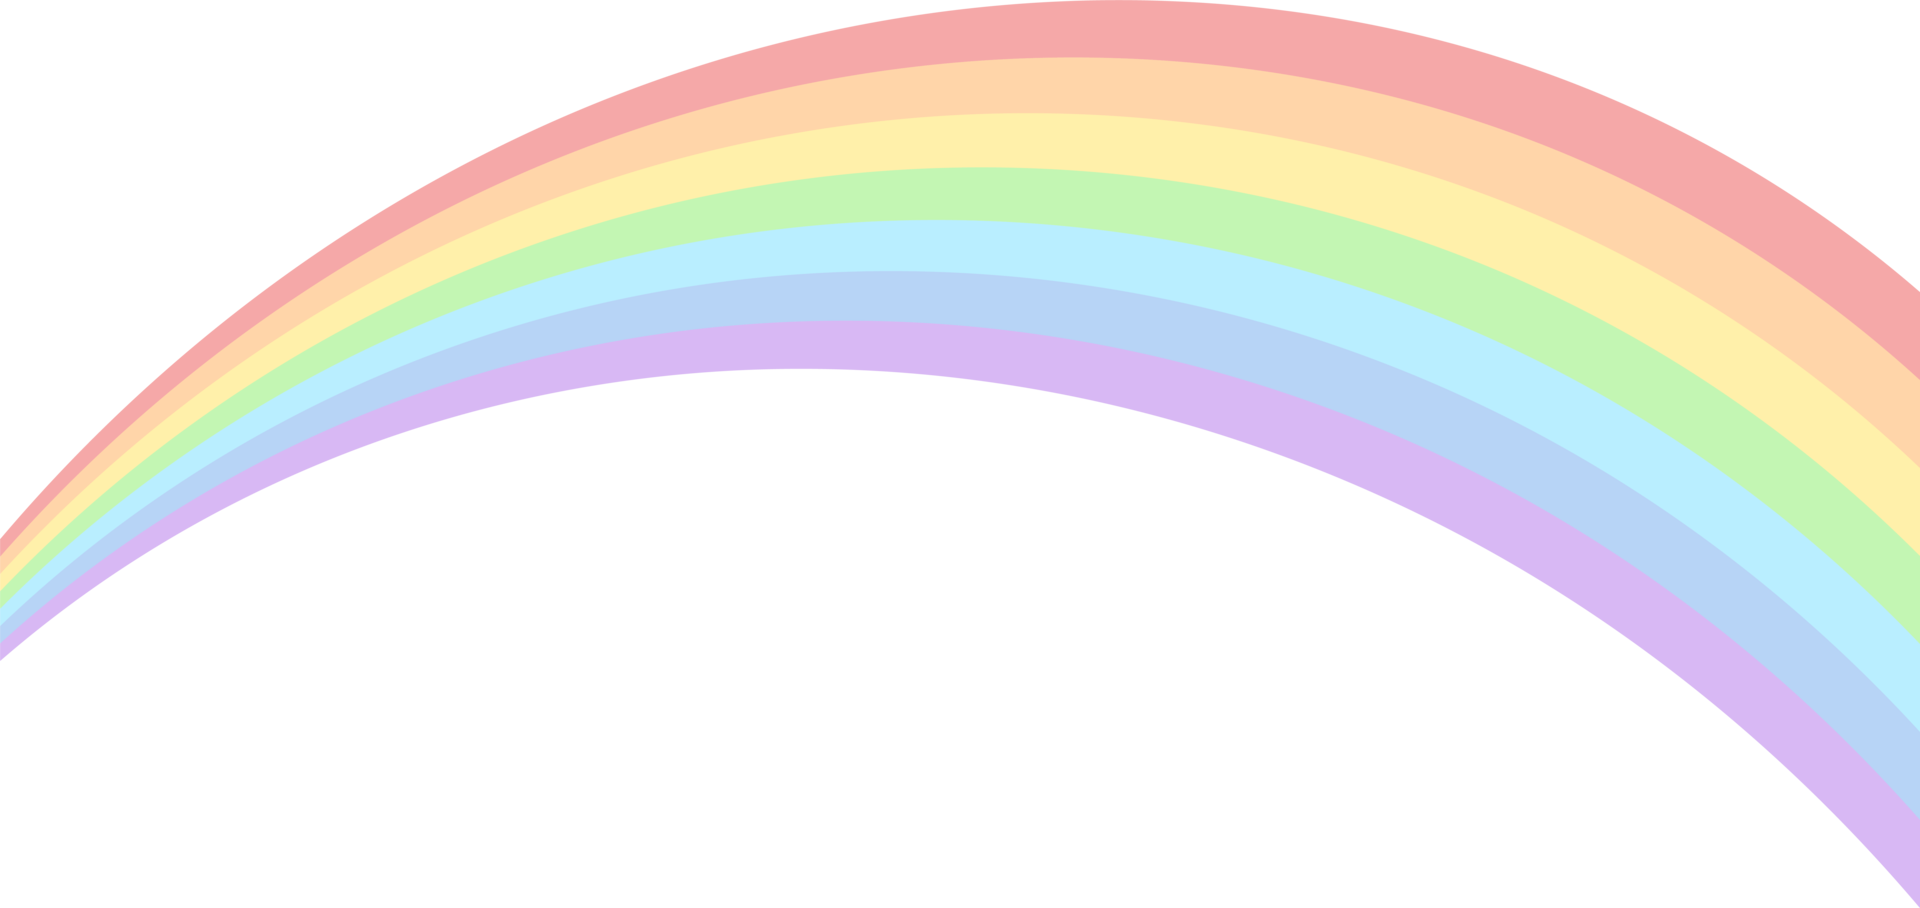 A RAINBOW IN THE BACKGROUND OF THE BODY.